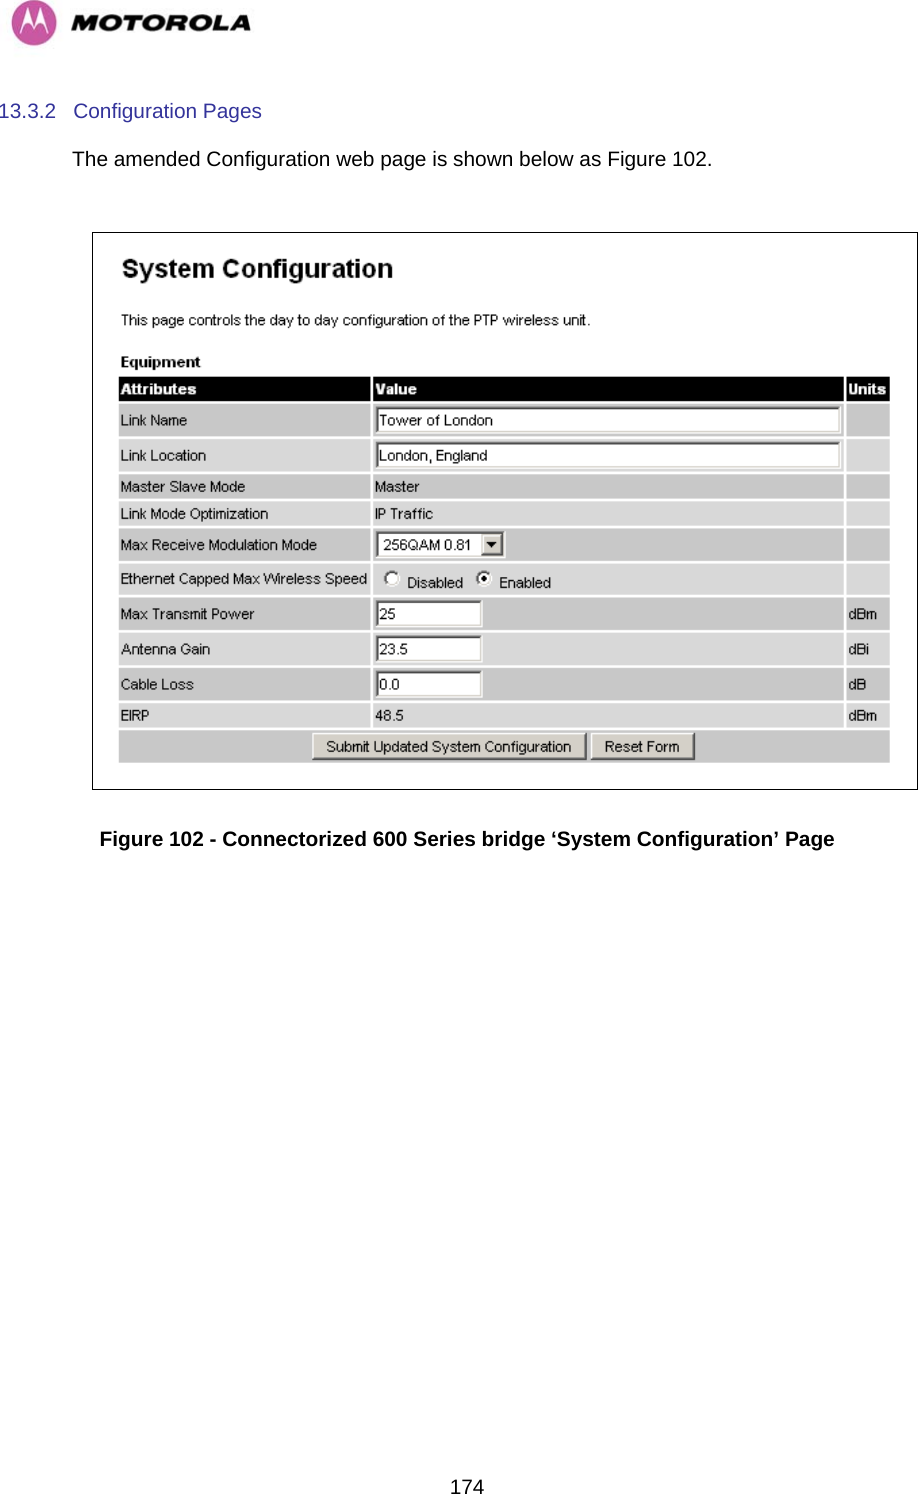   17413.3.2 Configuration Pages The amended Configuration web page is shown below as Figure 102.   Figure 102 - Connectorized 600 Series bridge ‘System Configuration’ Page 